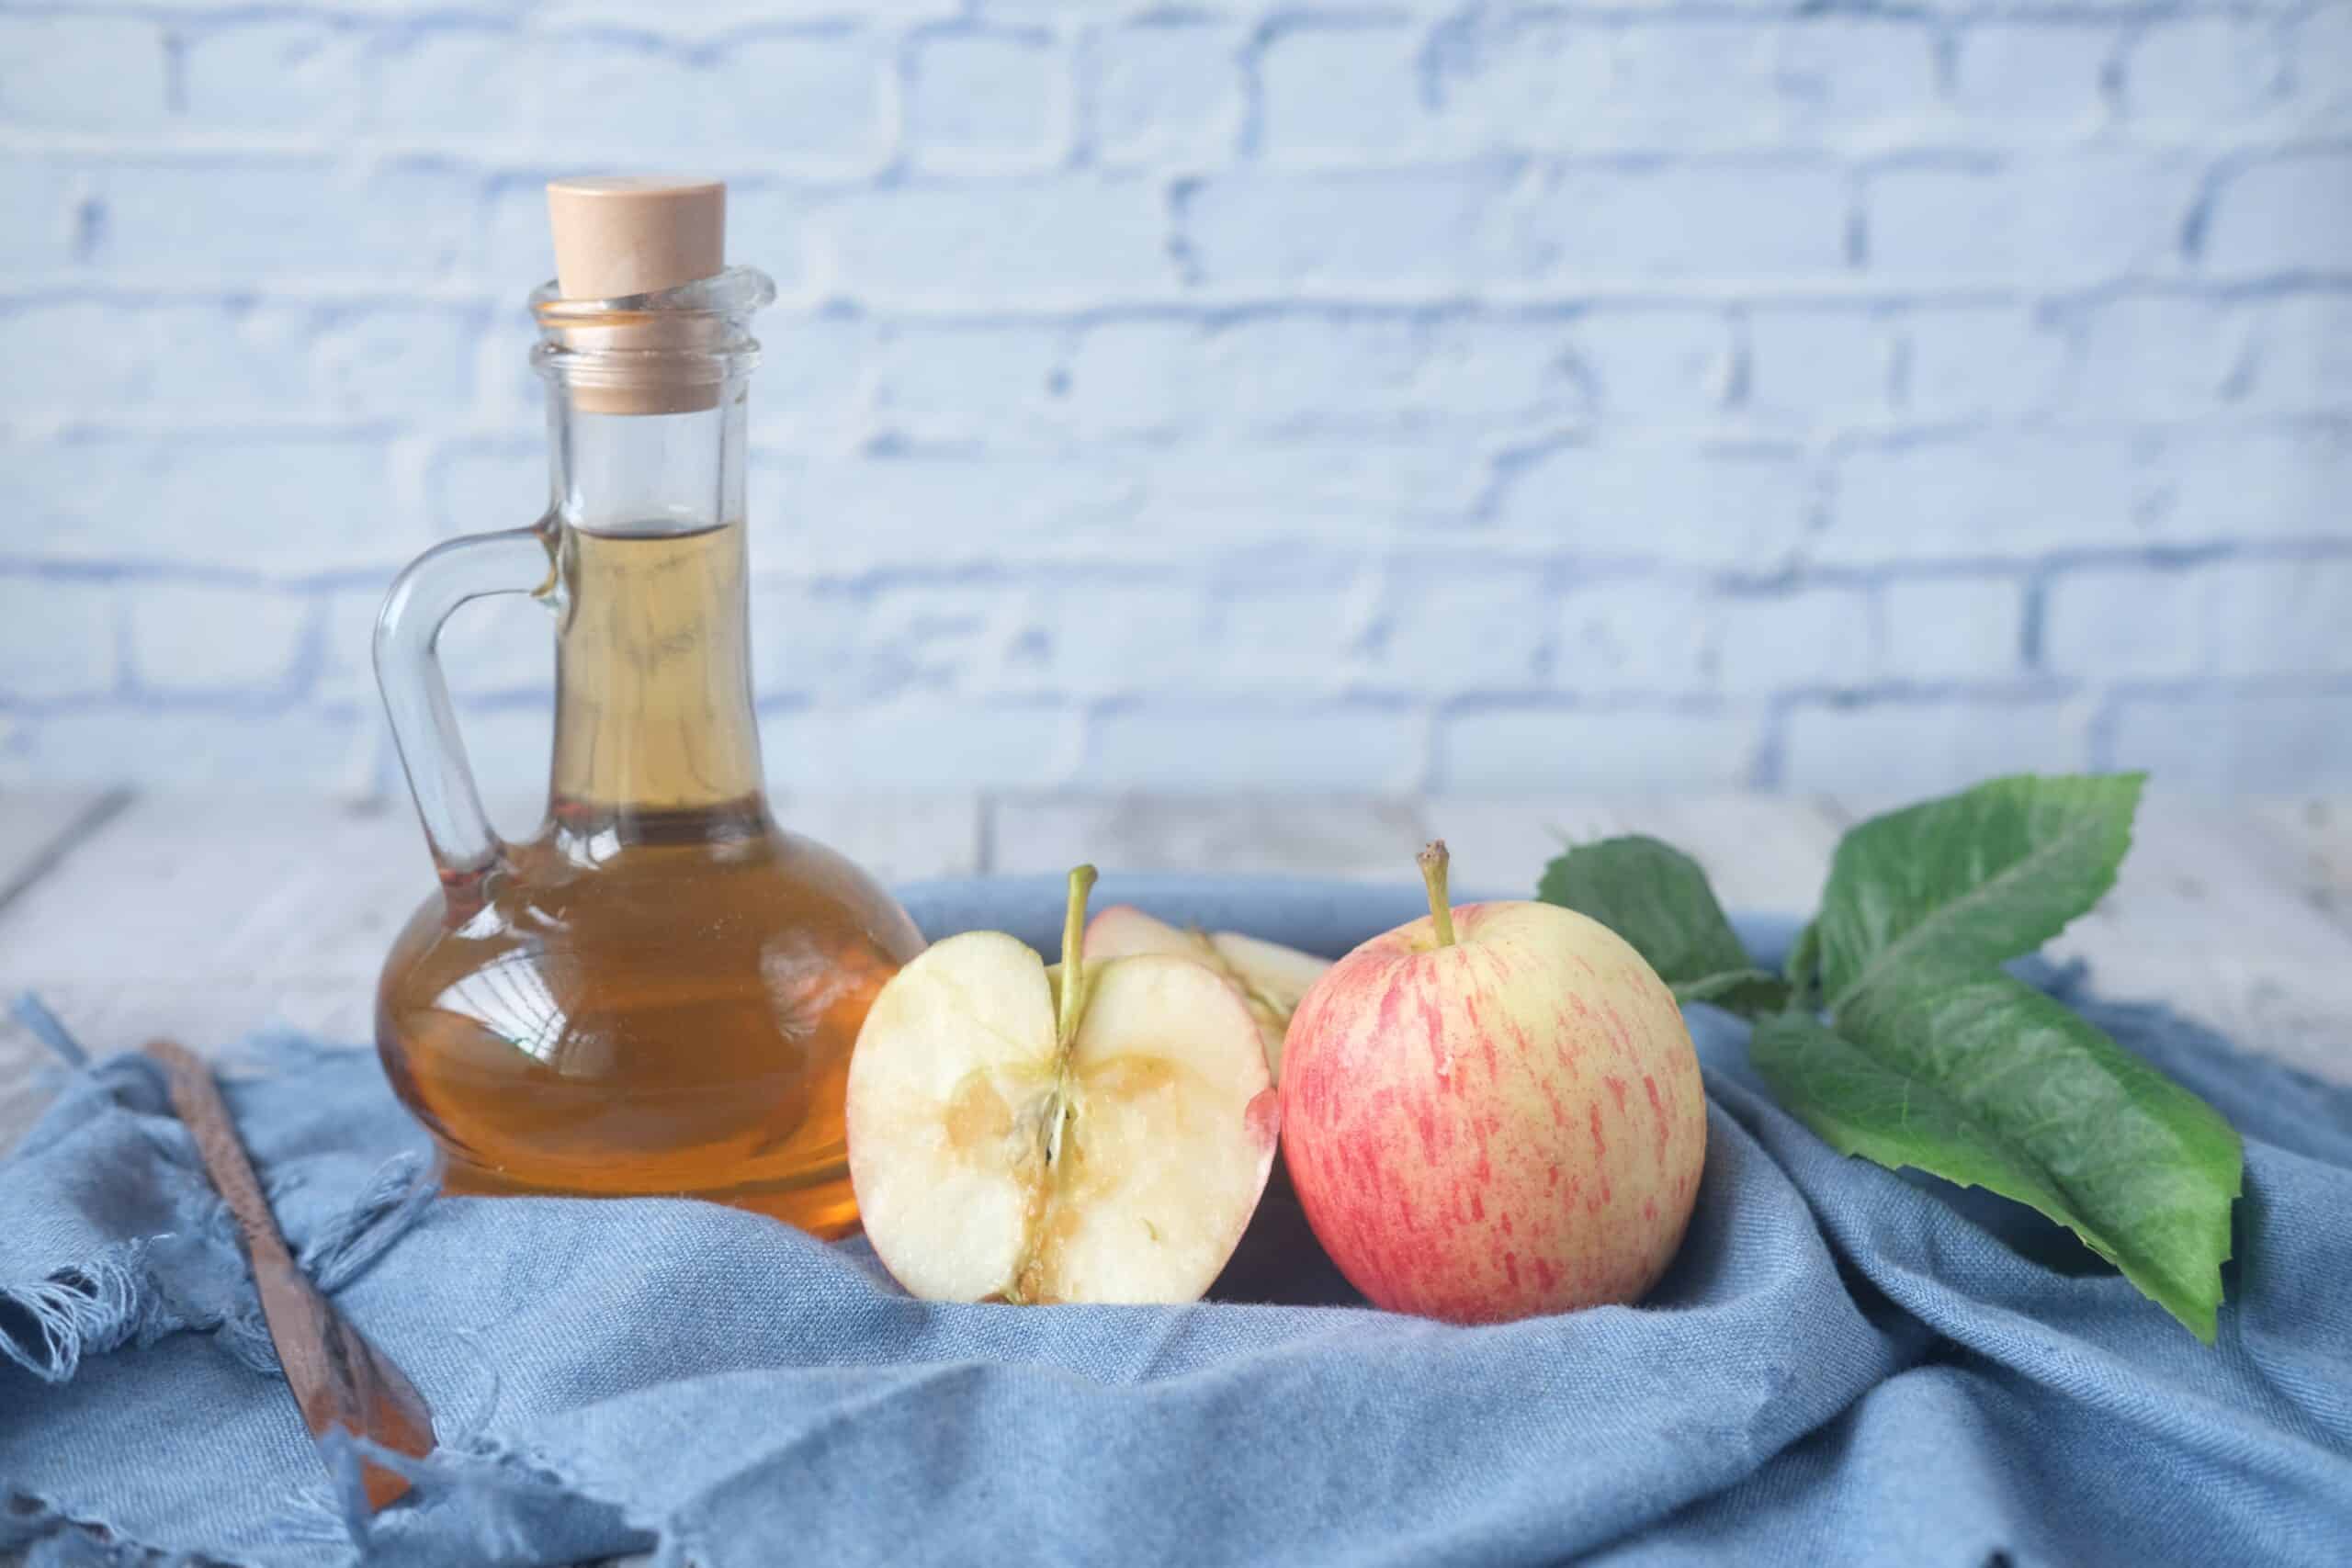 Healthy Apple Cider Vinegar for Weight Loss and Some Apples on a Cloth. WeightLoss-Solutions Teaches Clean Eating with Things Like Vinegar to Change Your Life Through Diet and Exercise.